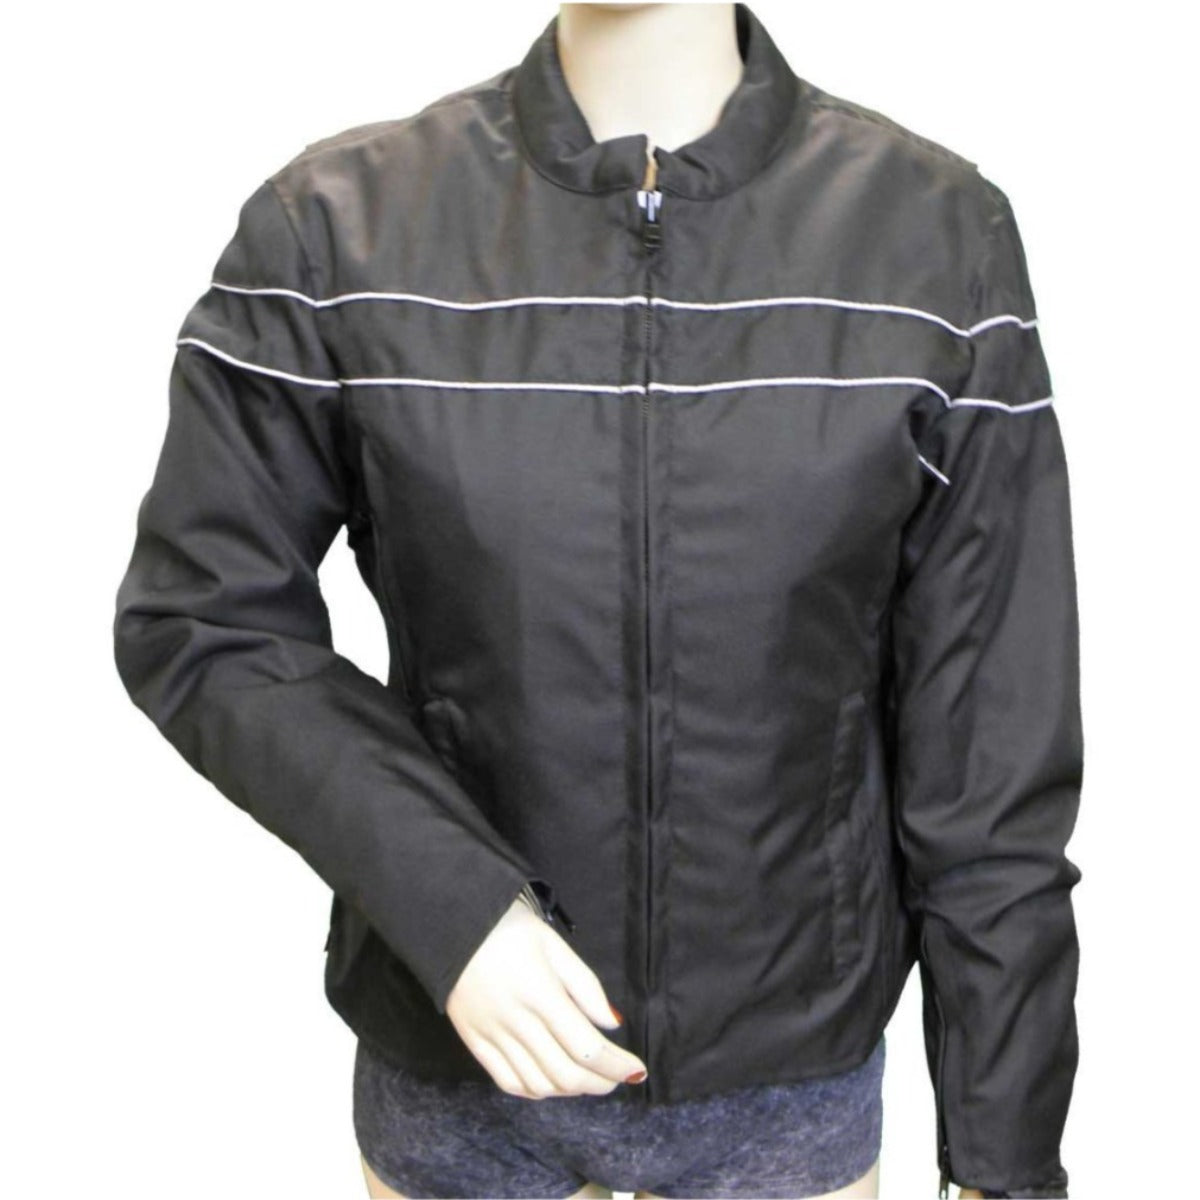 Vance Leather Textile Jacket with Reflective Piping and Lady Rider Embroidered on Back